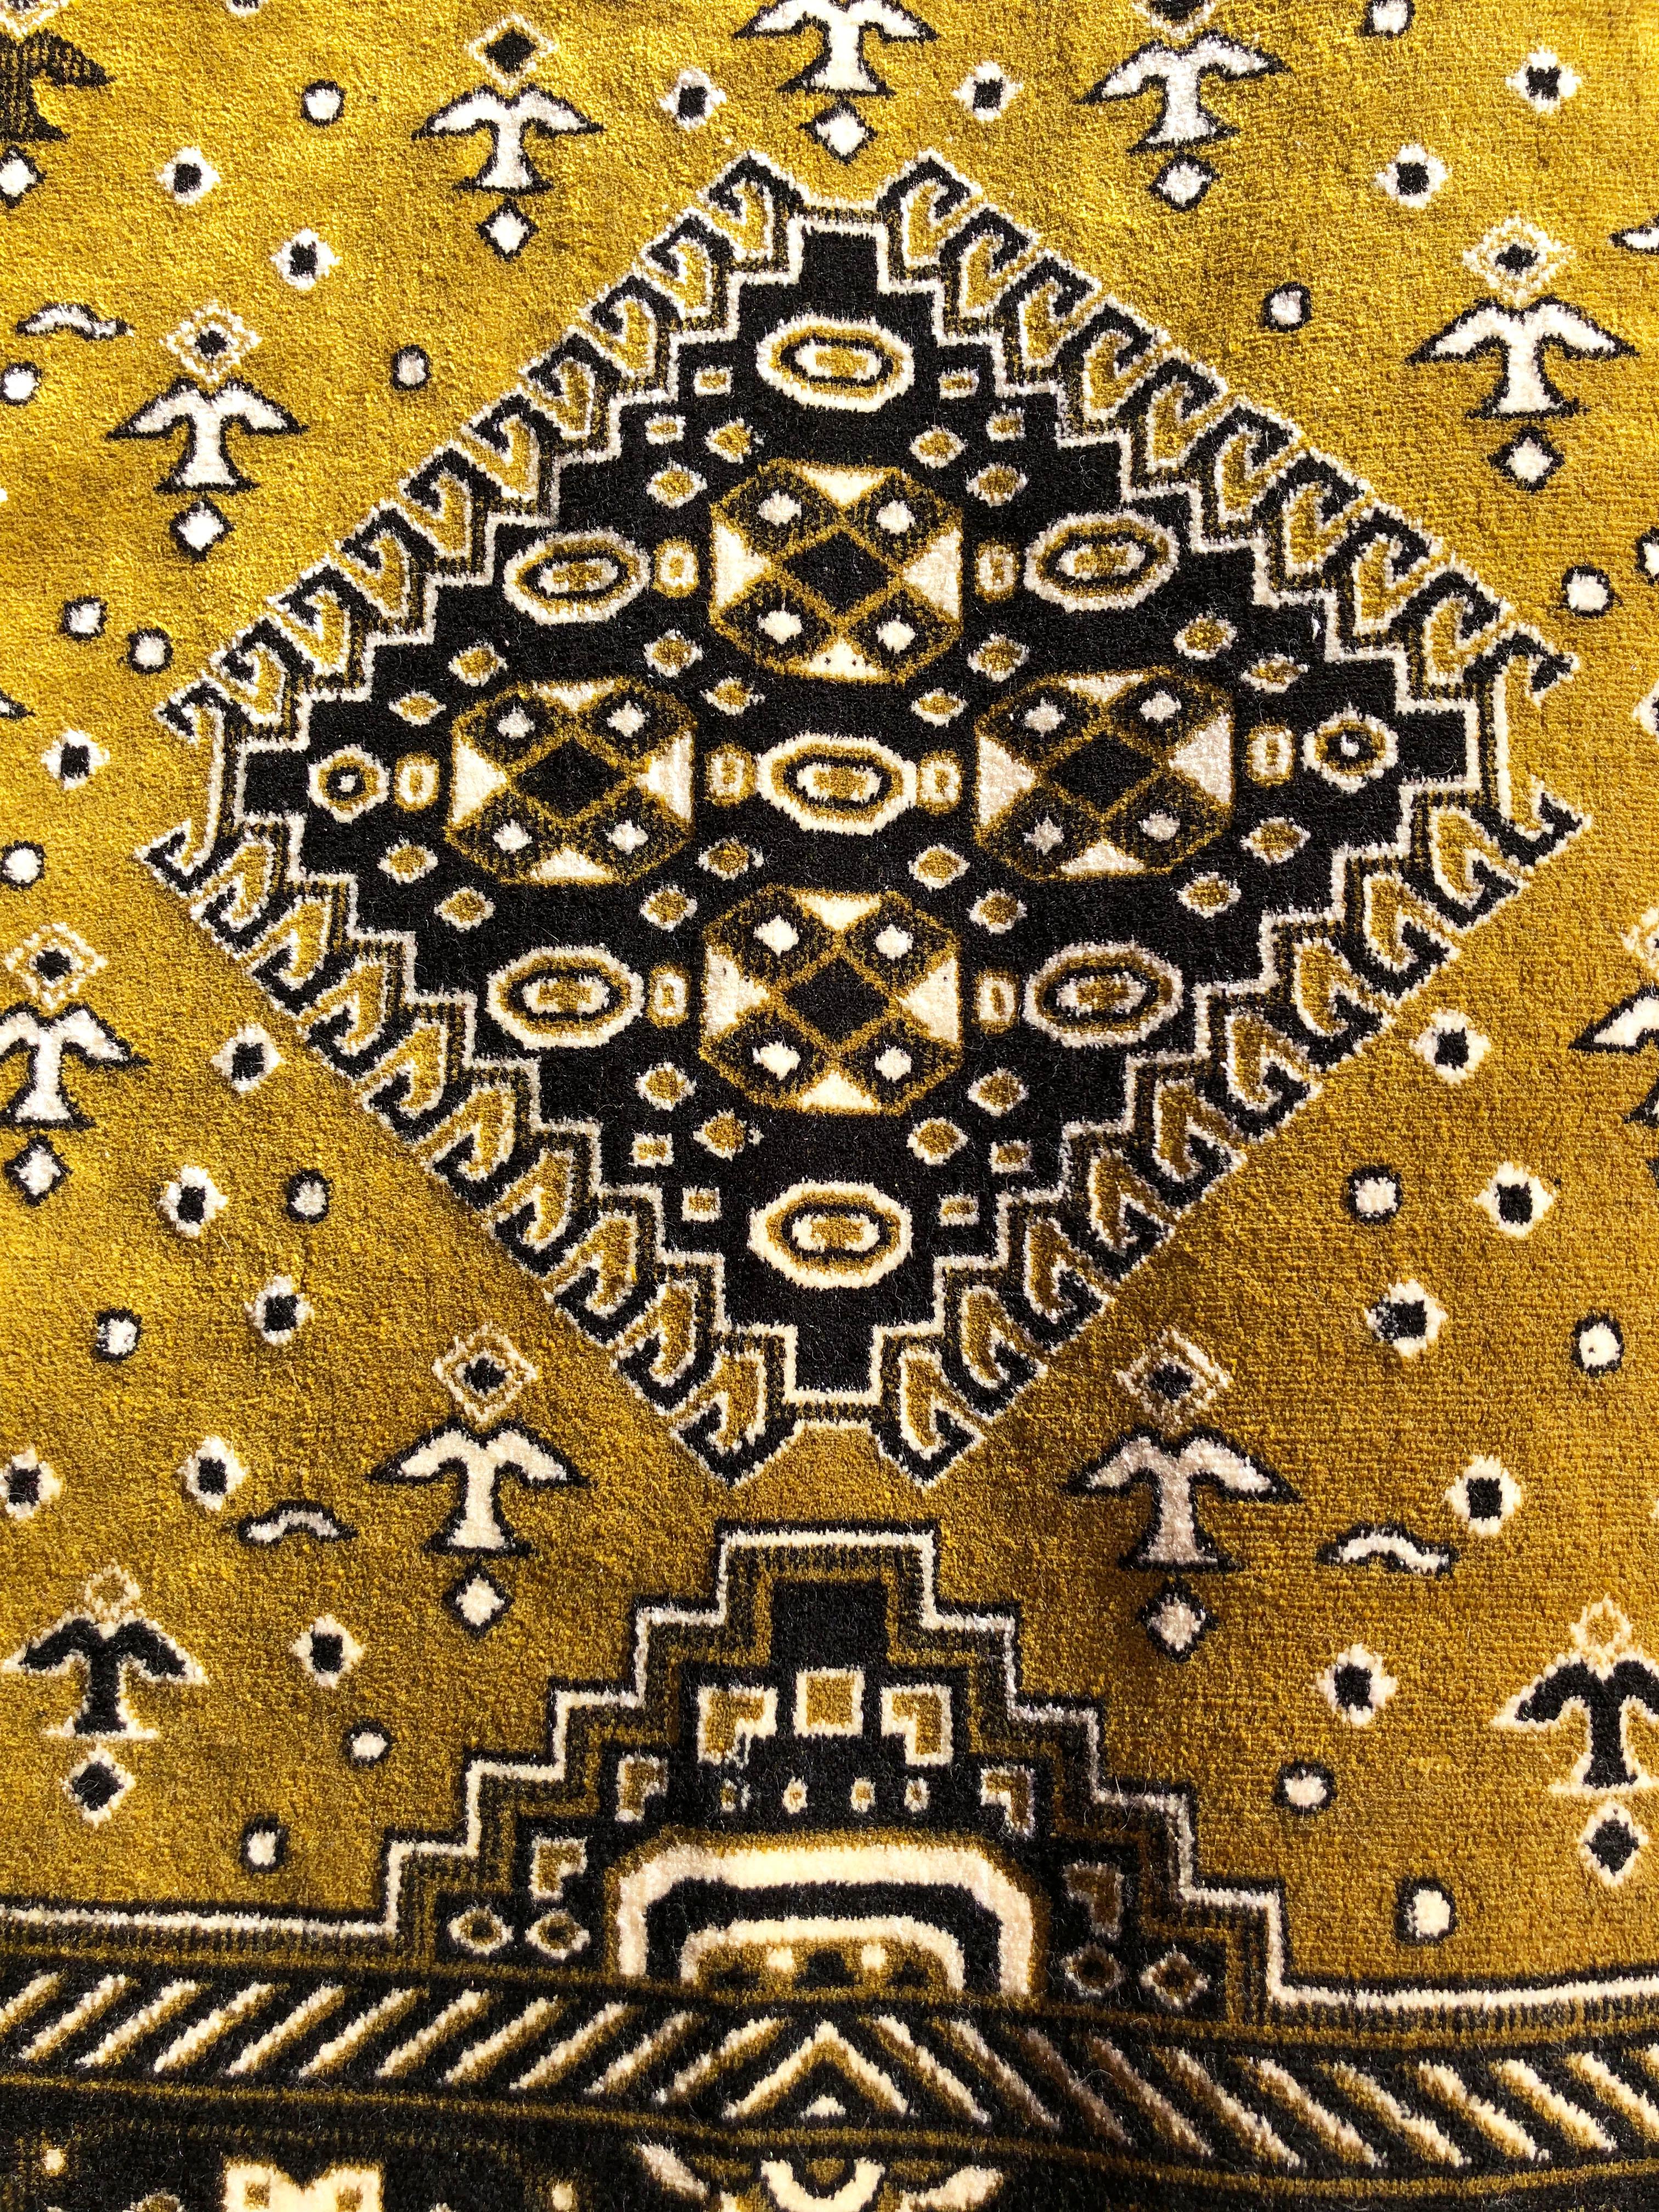 New Contemporary Moroccan Silk Area Rug - Rabat Style Gold Velvet In Excellent Condition For Sale In Vineyard Haven, MA